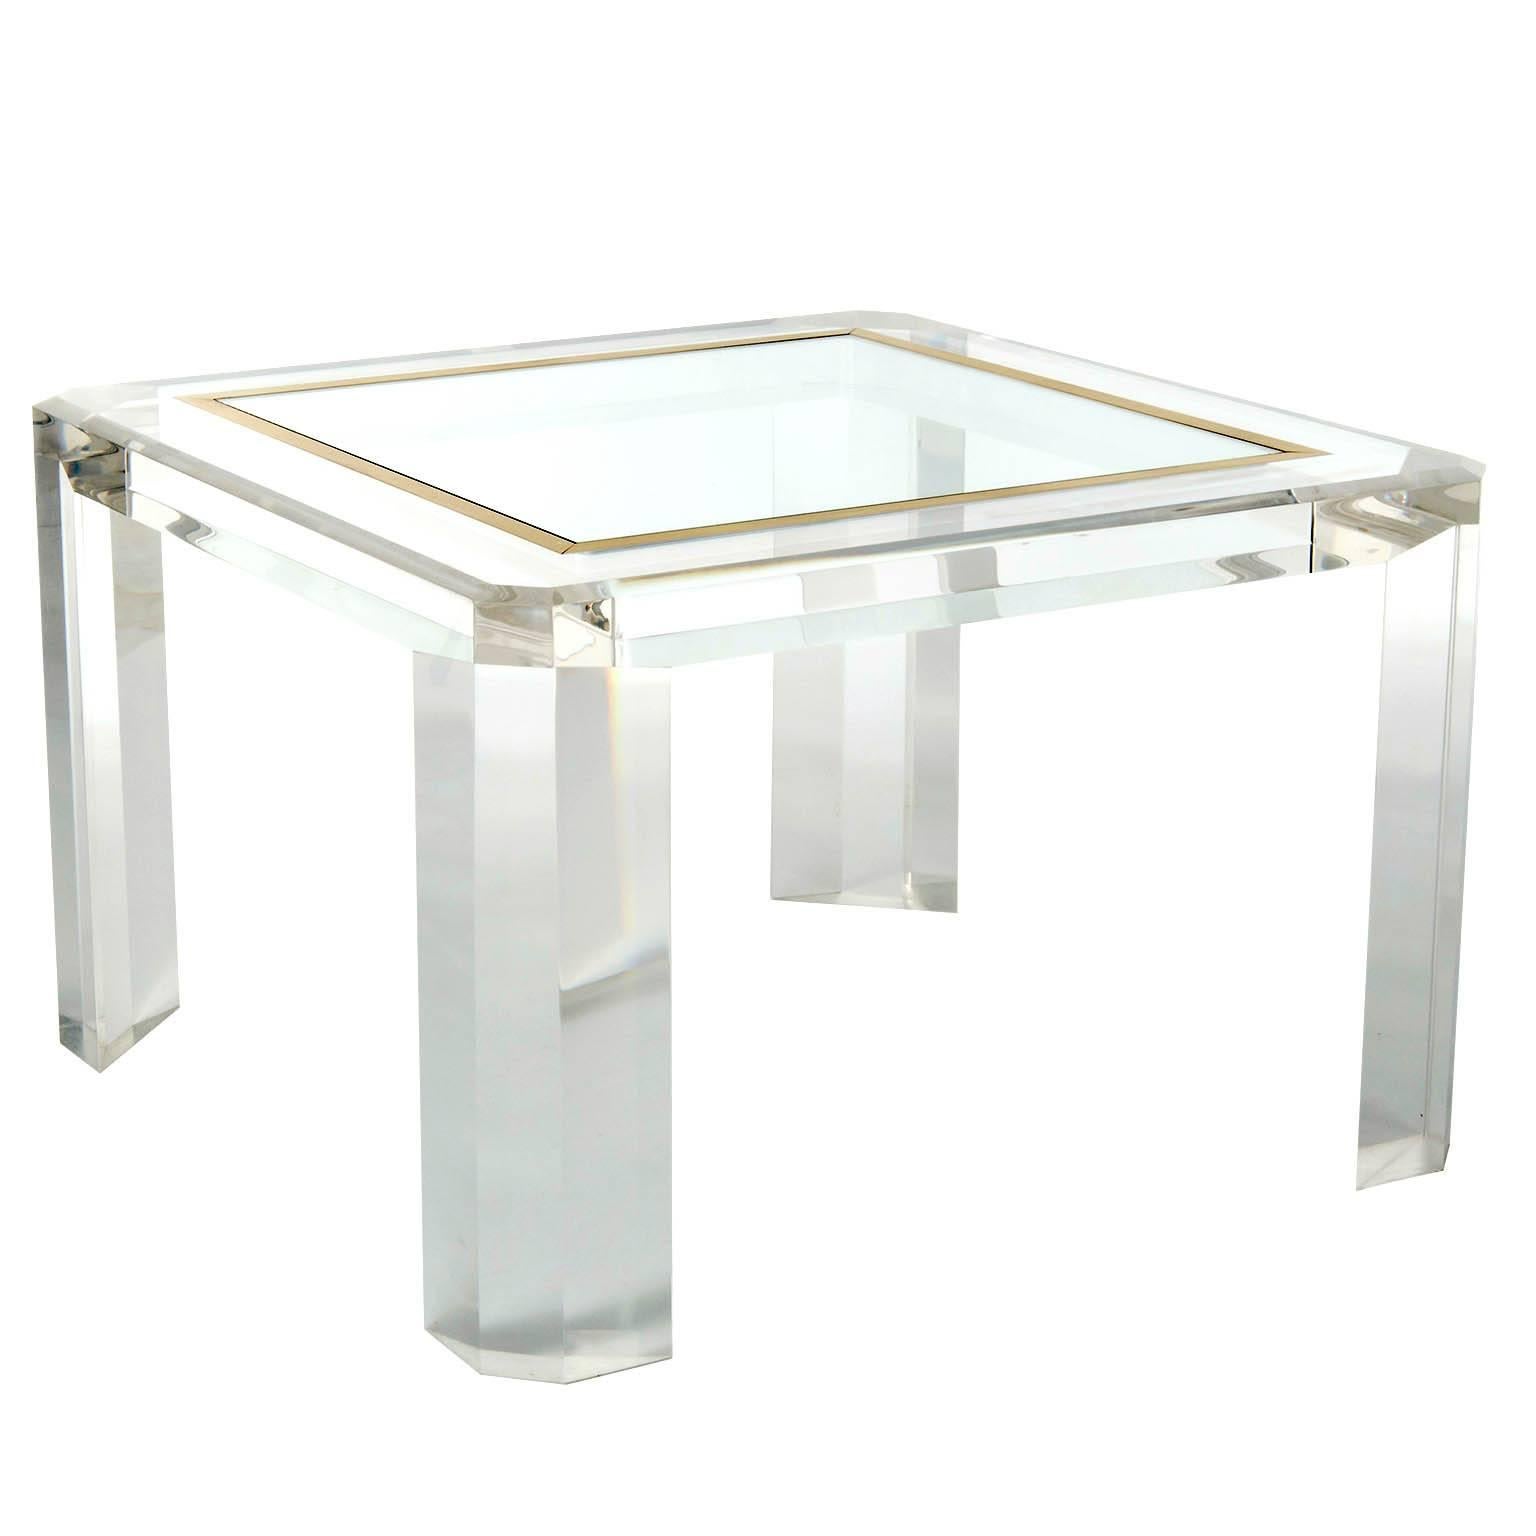 A pair of square hollywood regency cocktail or coffee tables made of Lucite, brass and glass manufactured in Mid-Century, circa 1970.
 